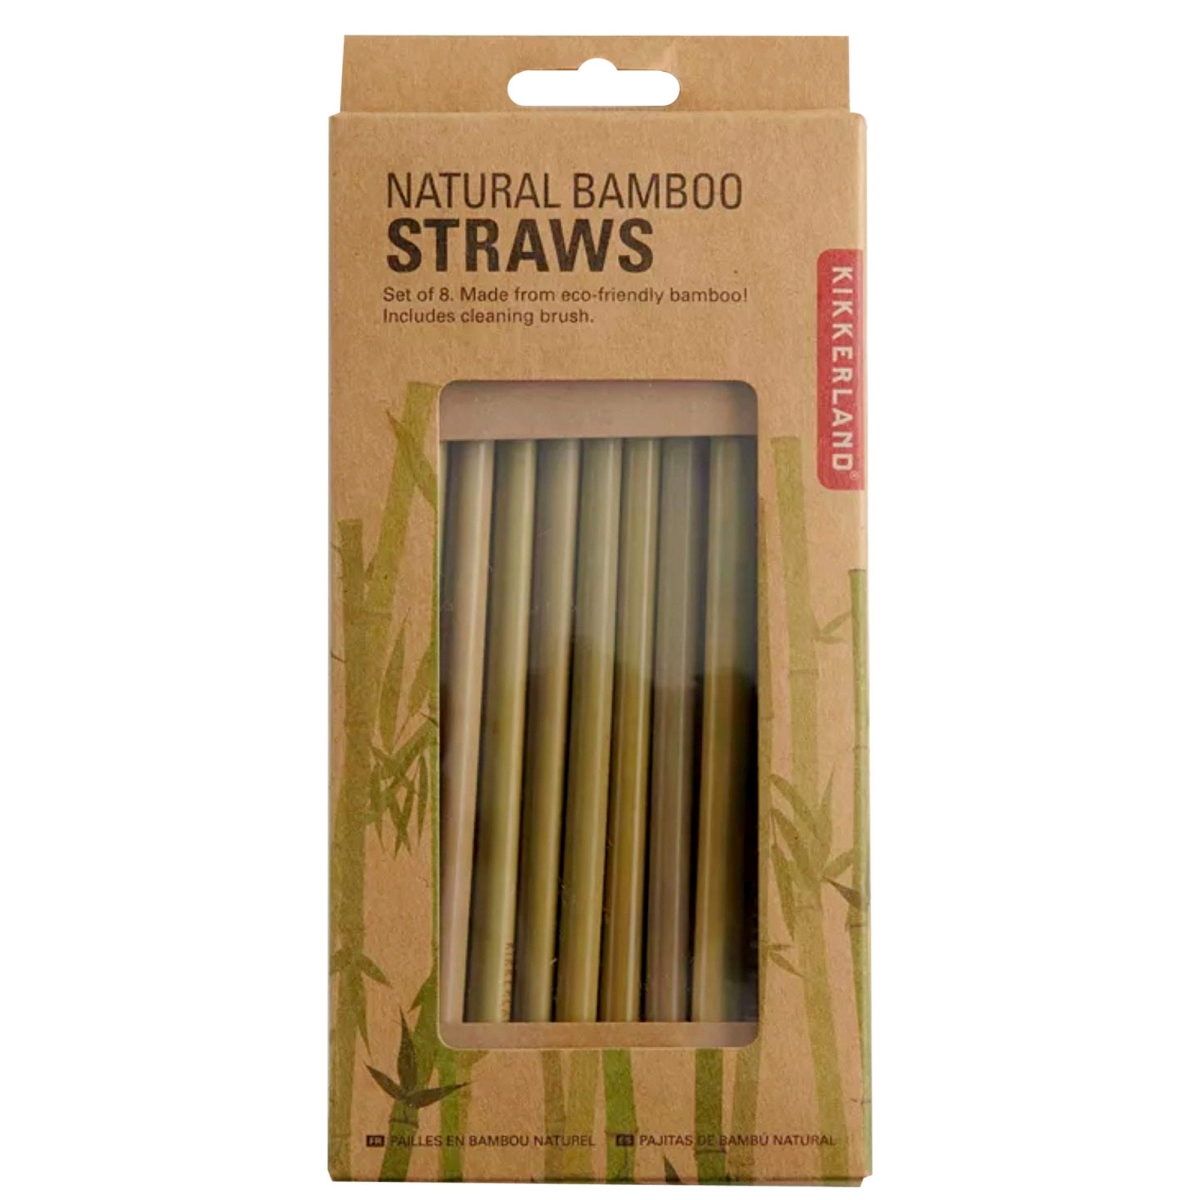 Picture of Kole Imports AH254 Kikkerland Natural Bamboo Reusable Straws - Set of 8 - Pack of 24